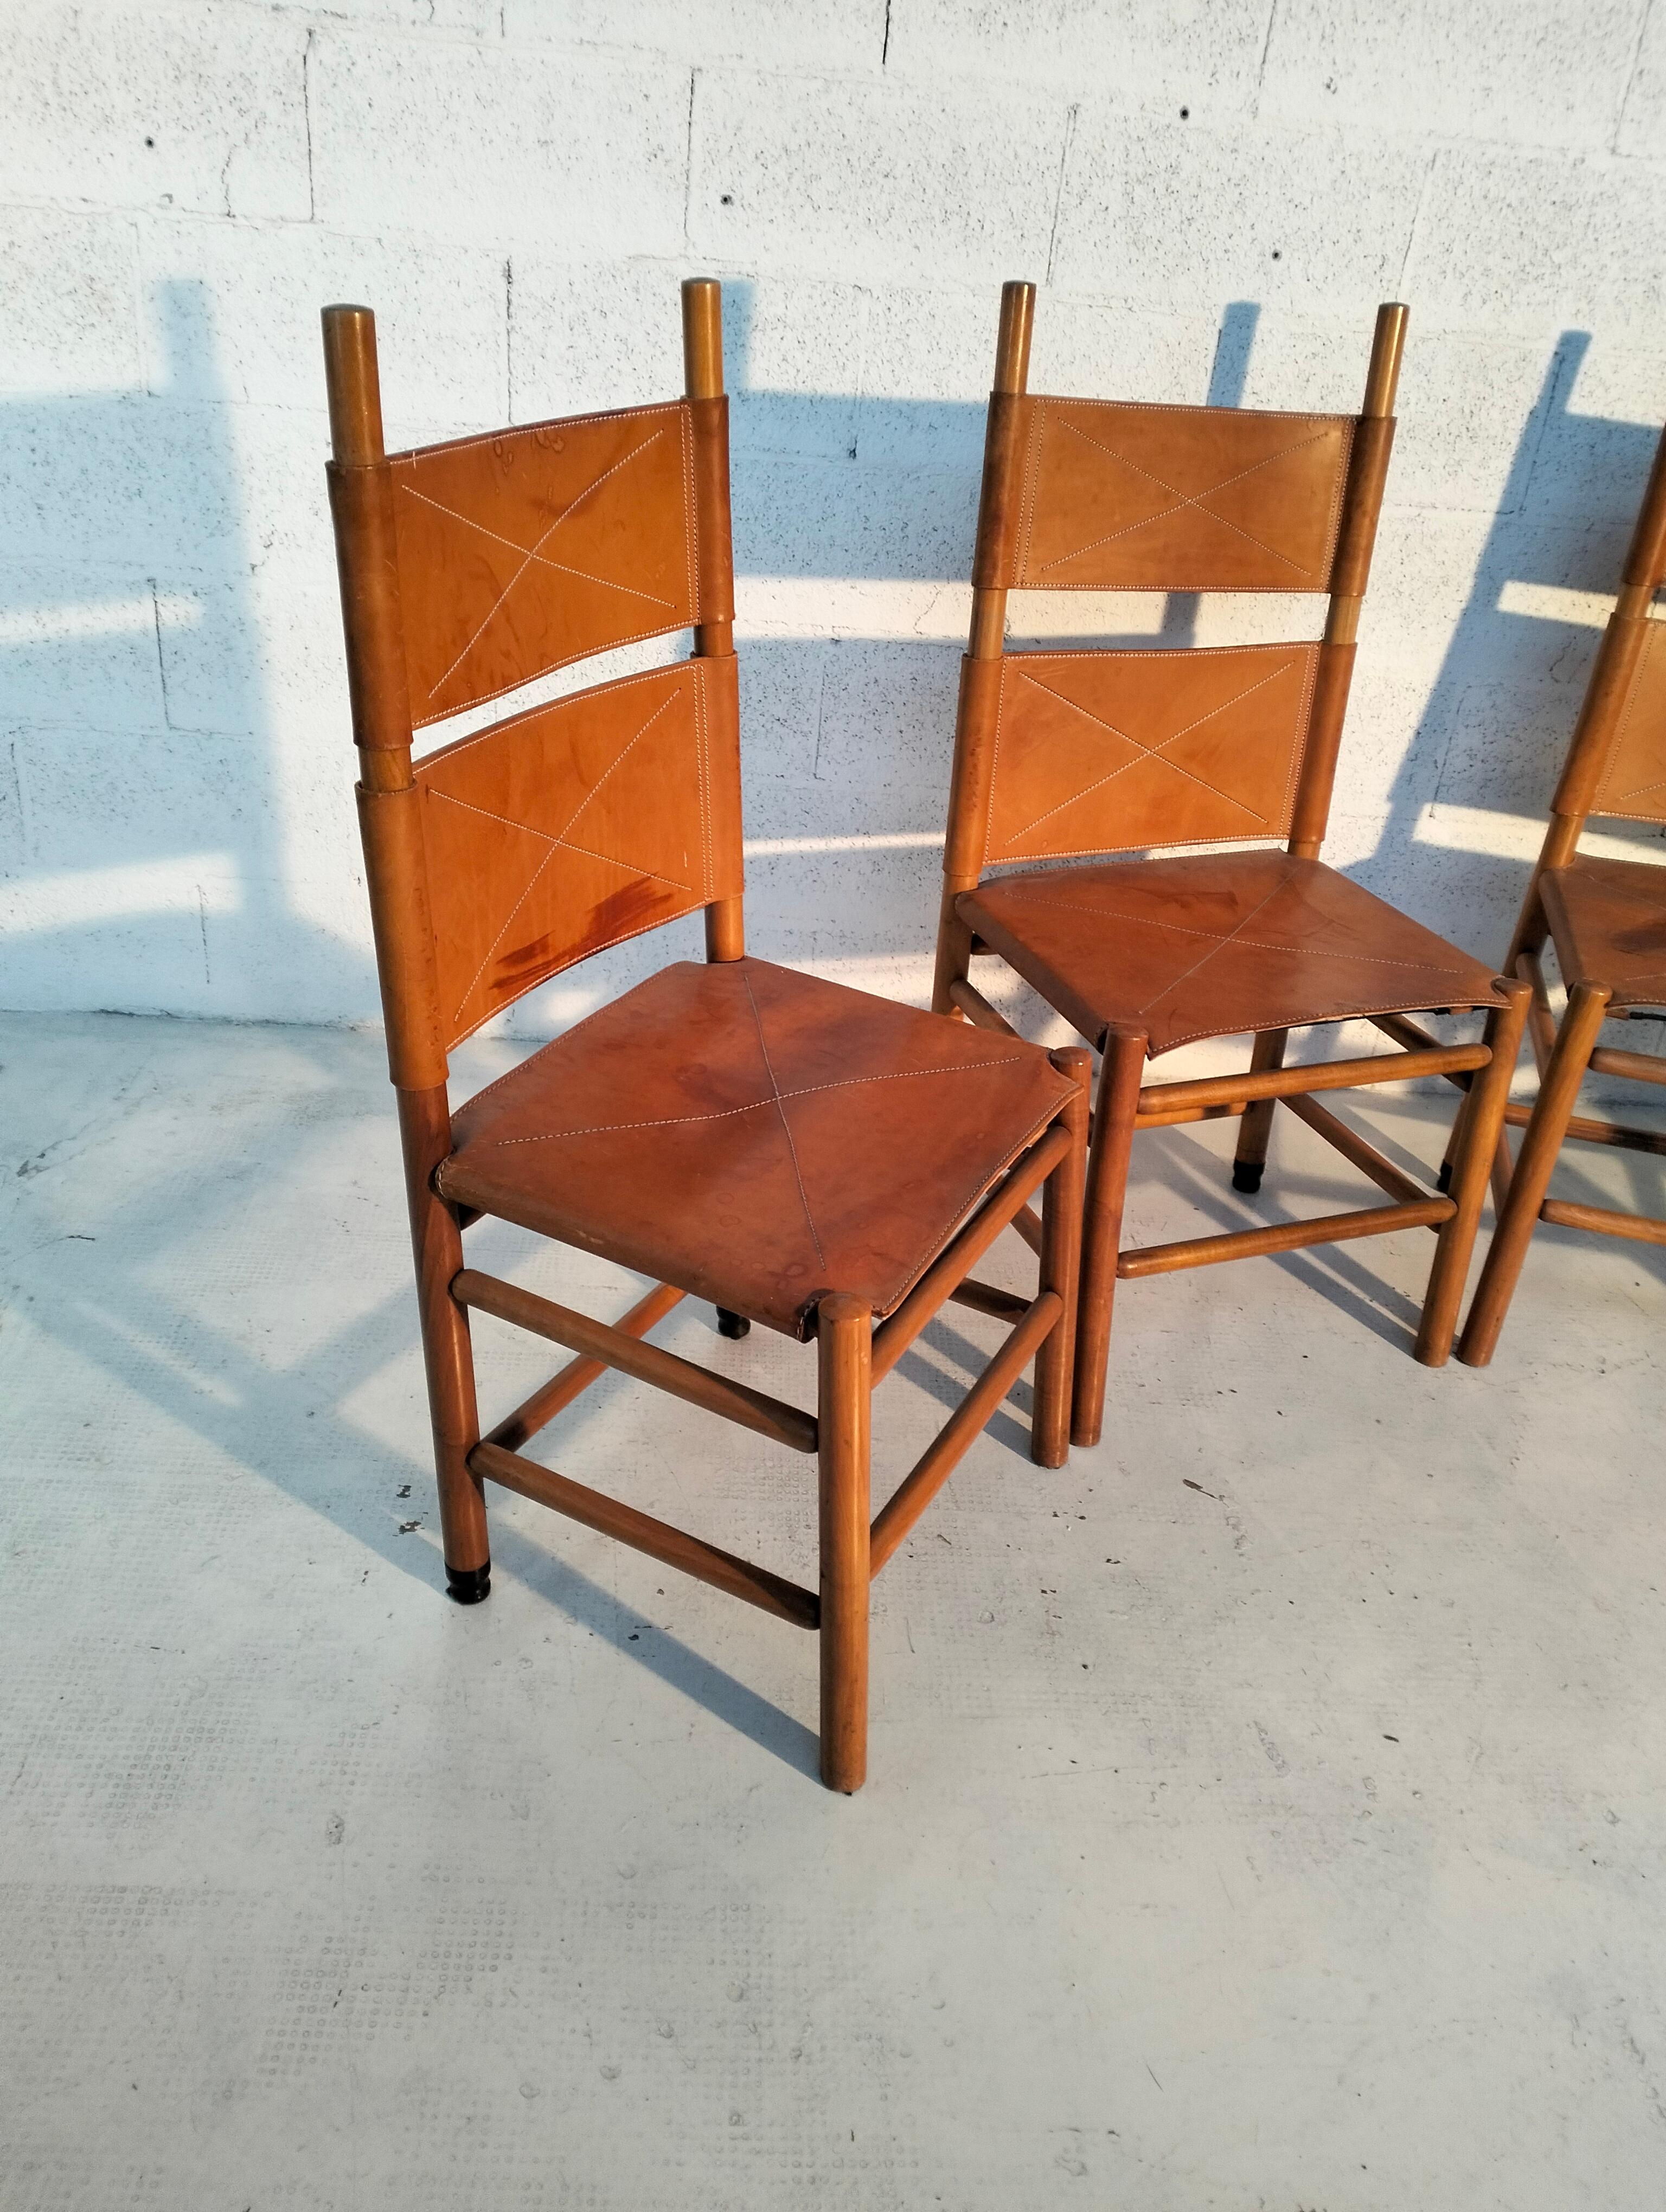 Mid-Century Modern Set of 4 chairs  “Kentucky” model by Carlo Scarpa  for Bernini 70s, 80s